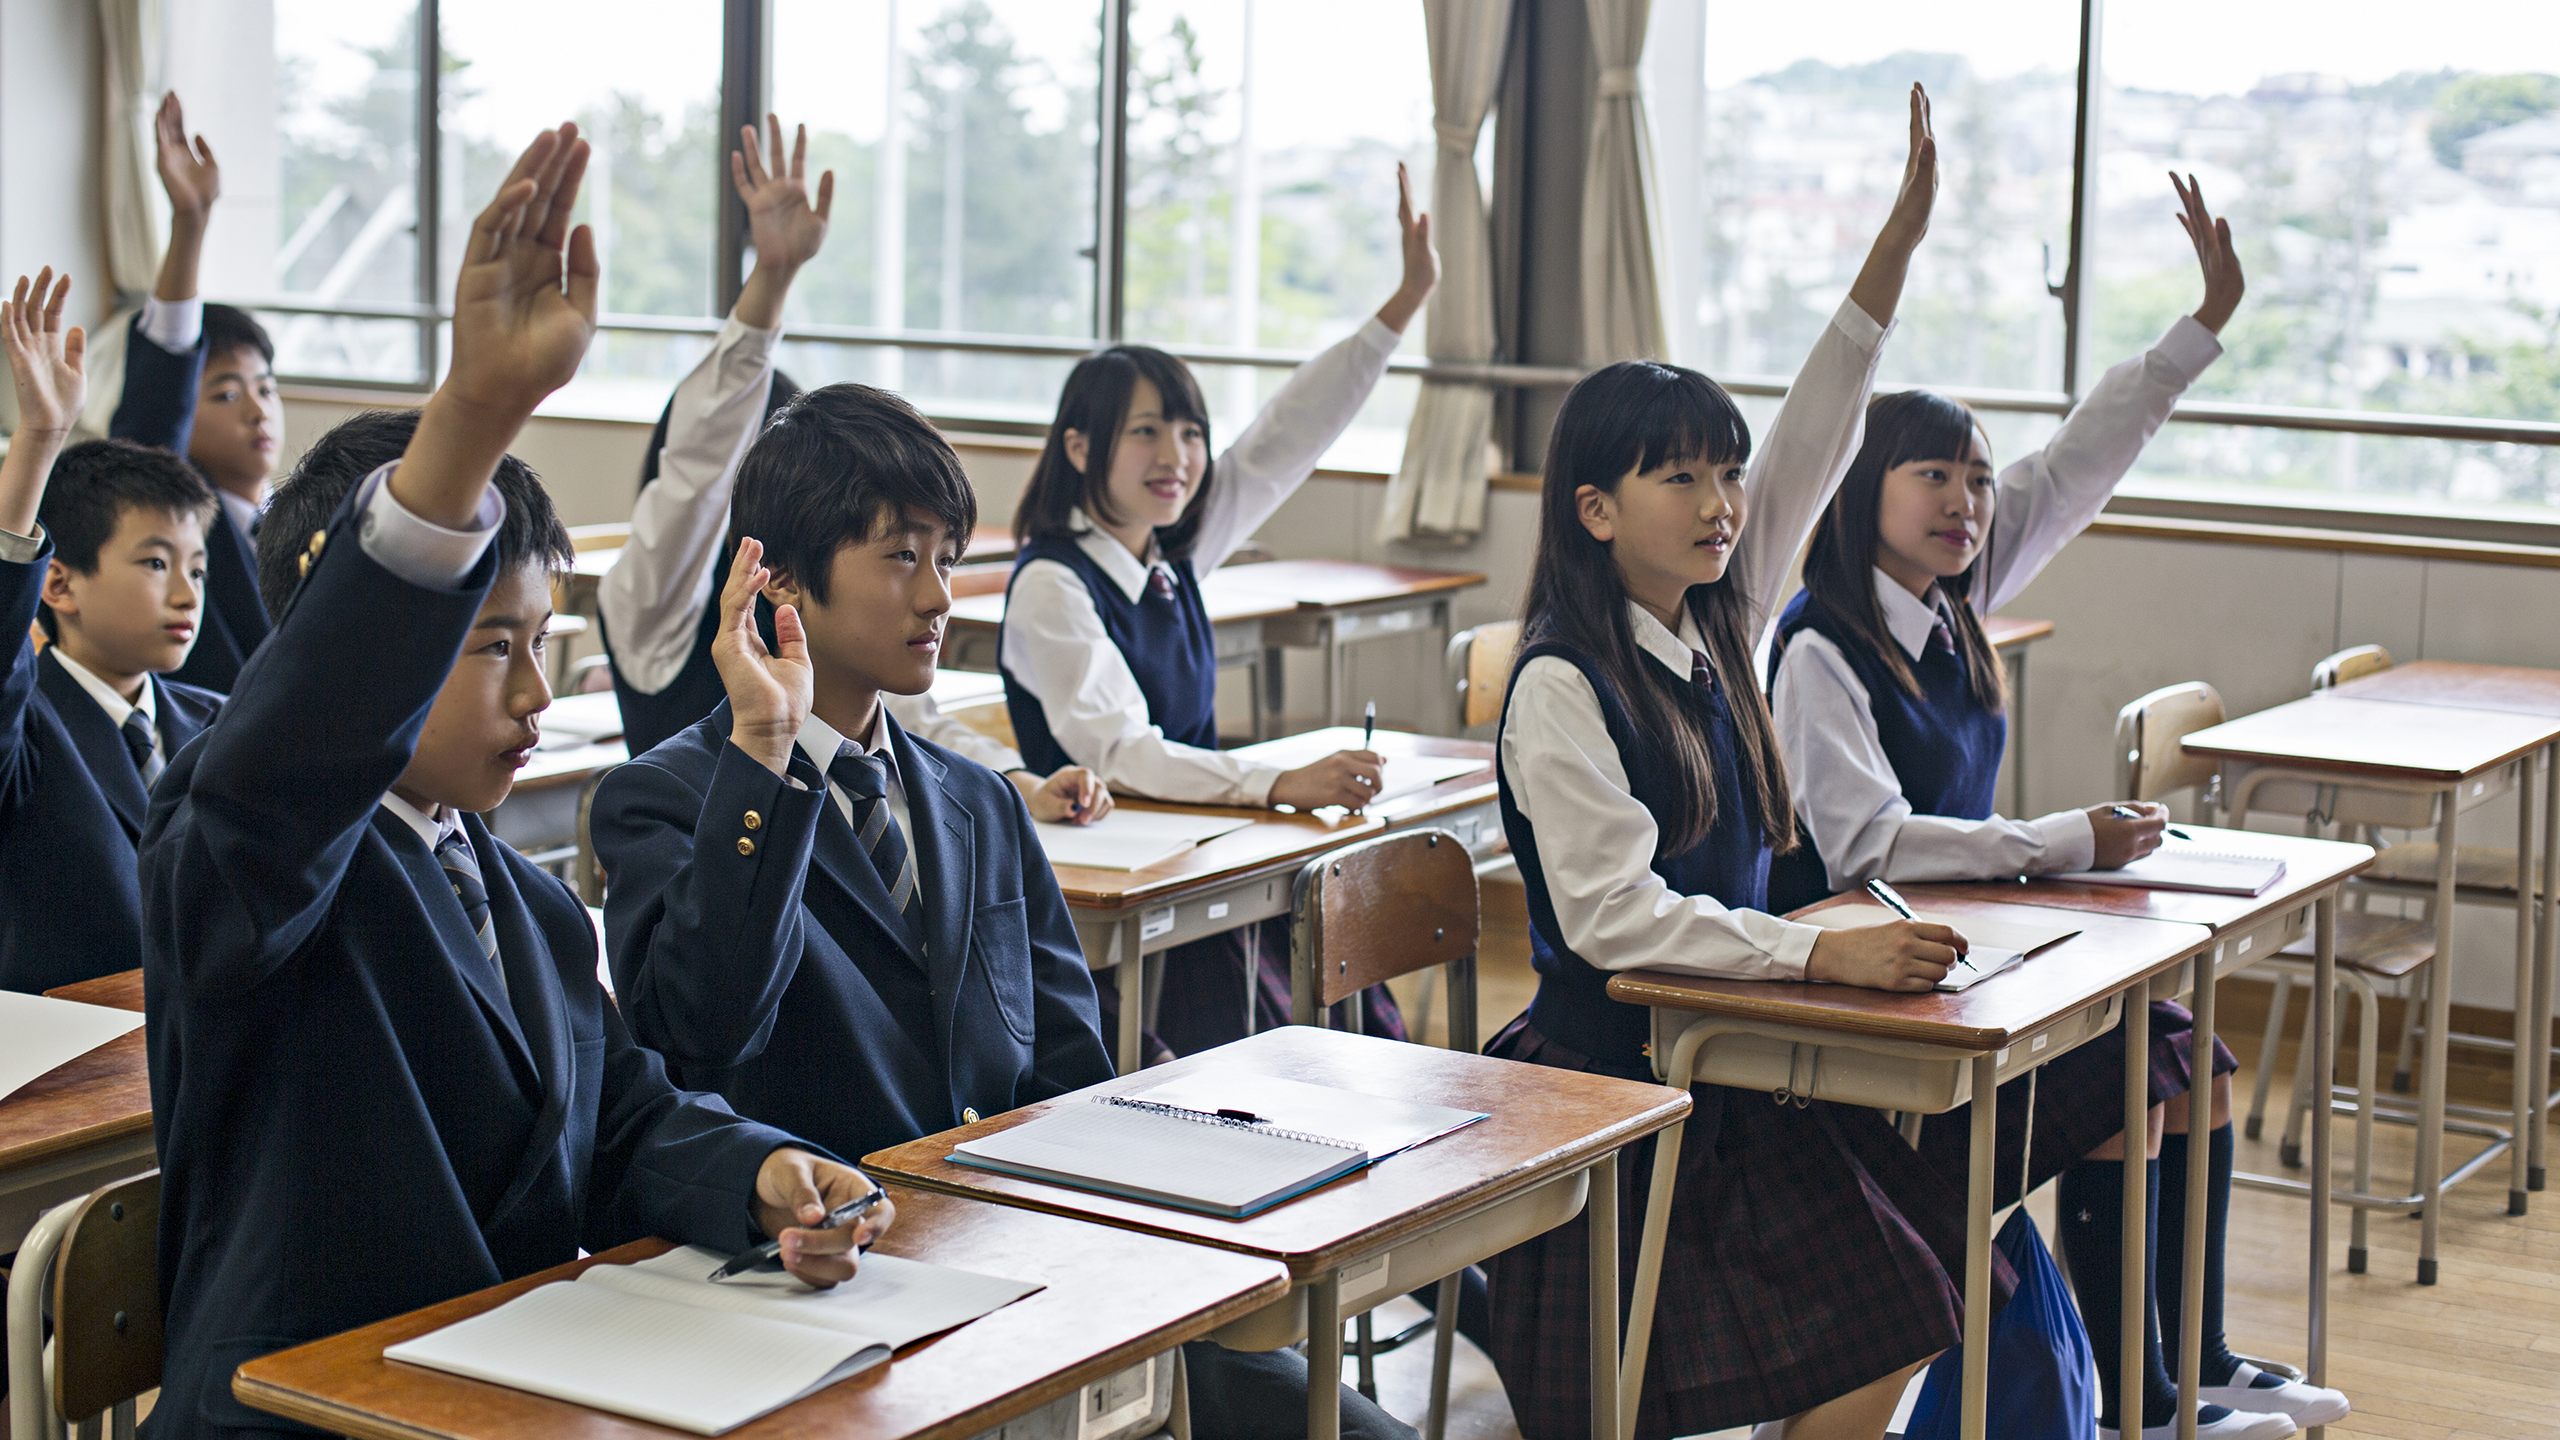 Image of students raising hands in classroom